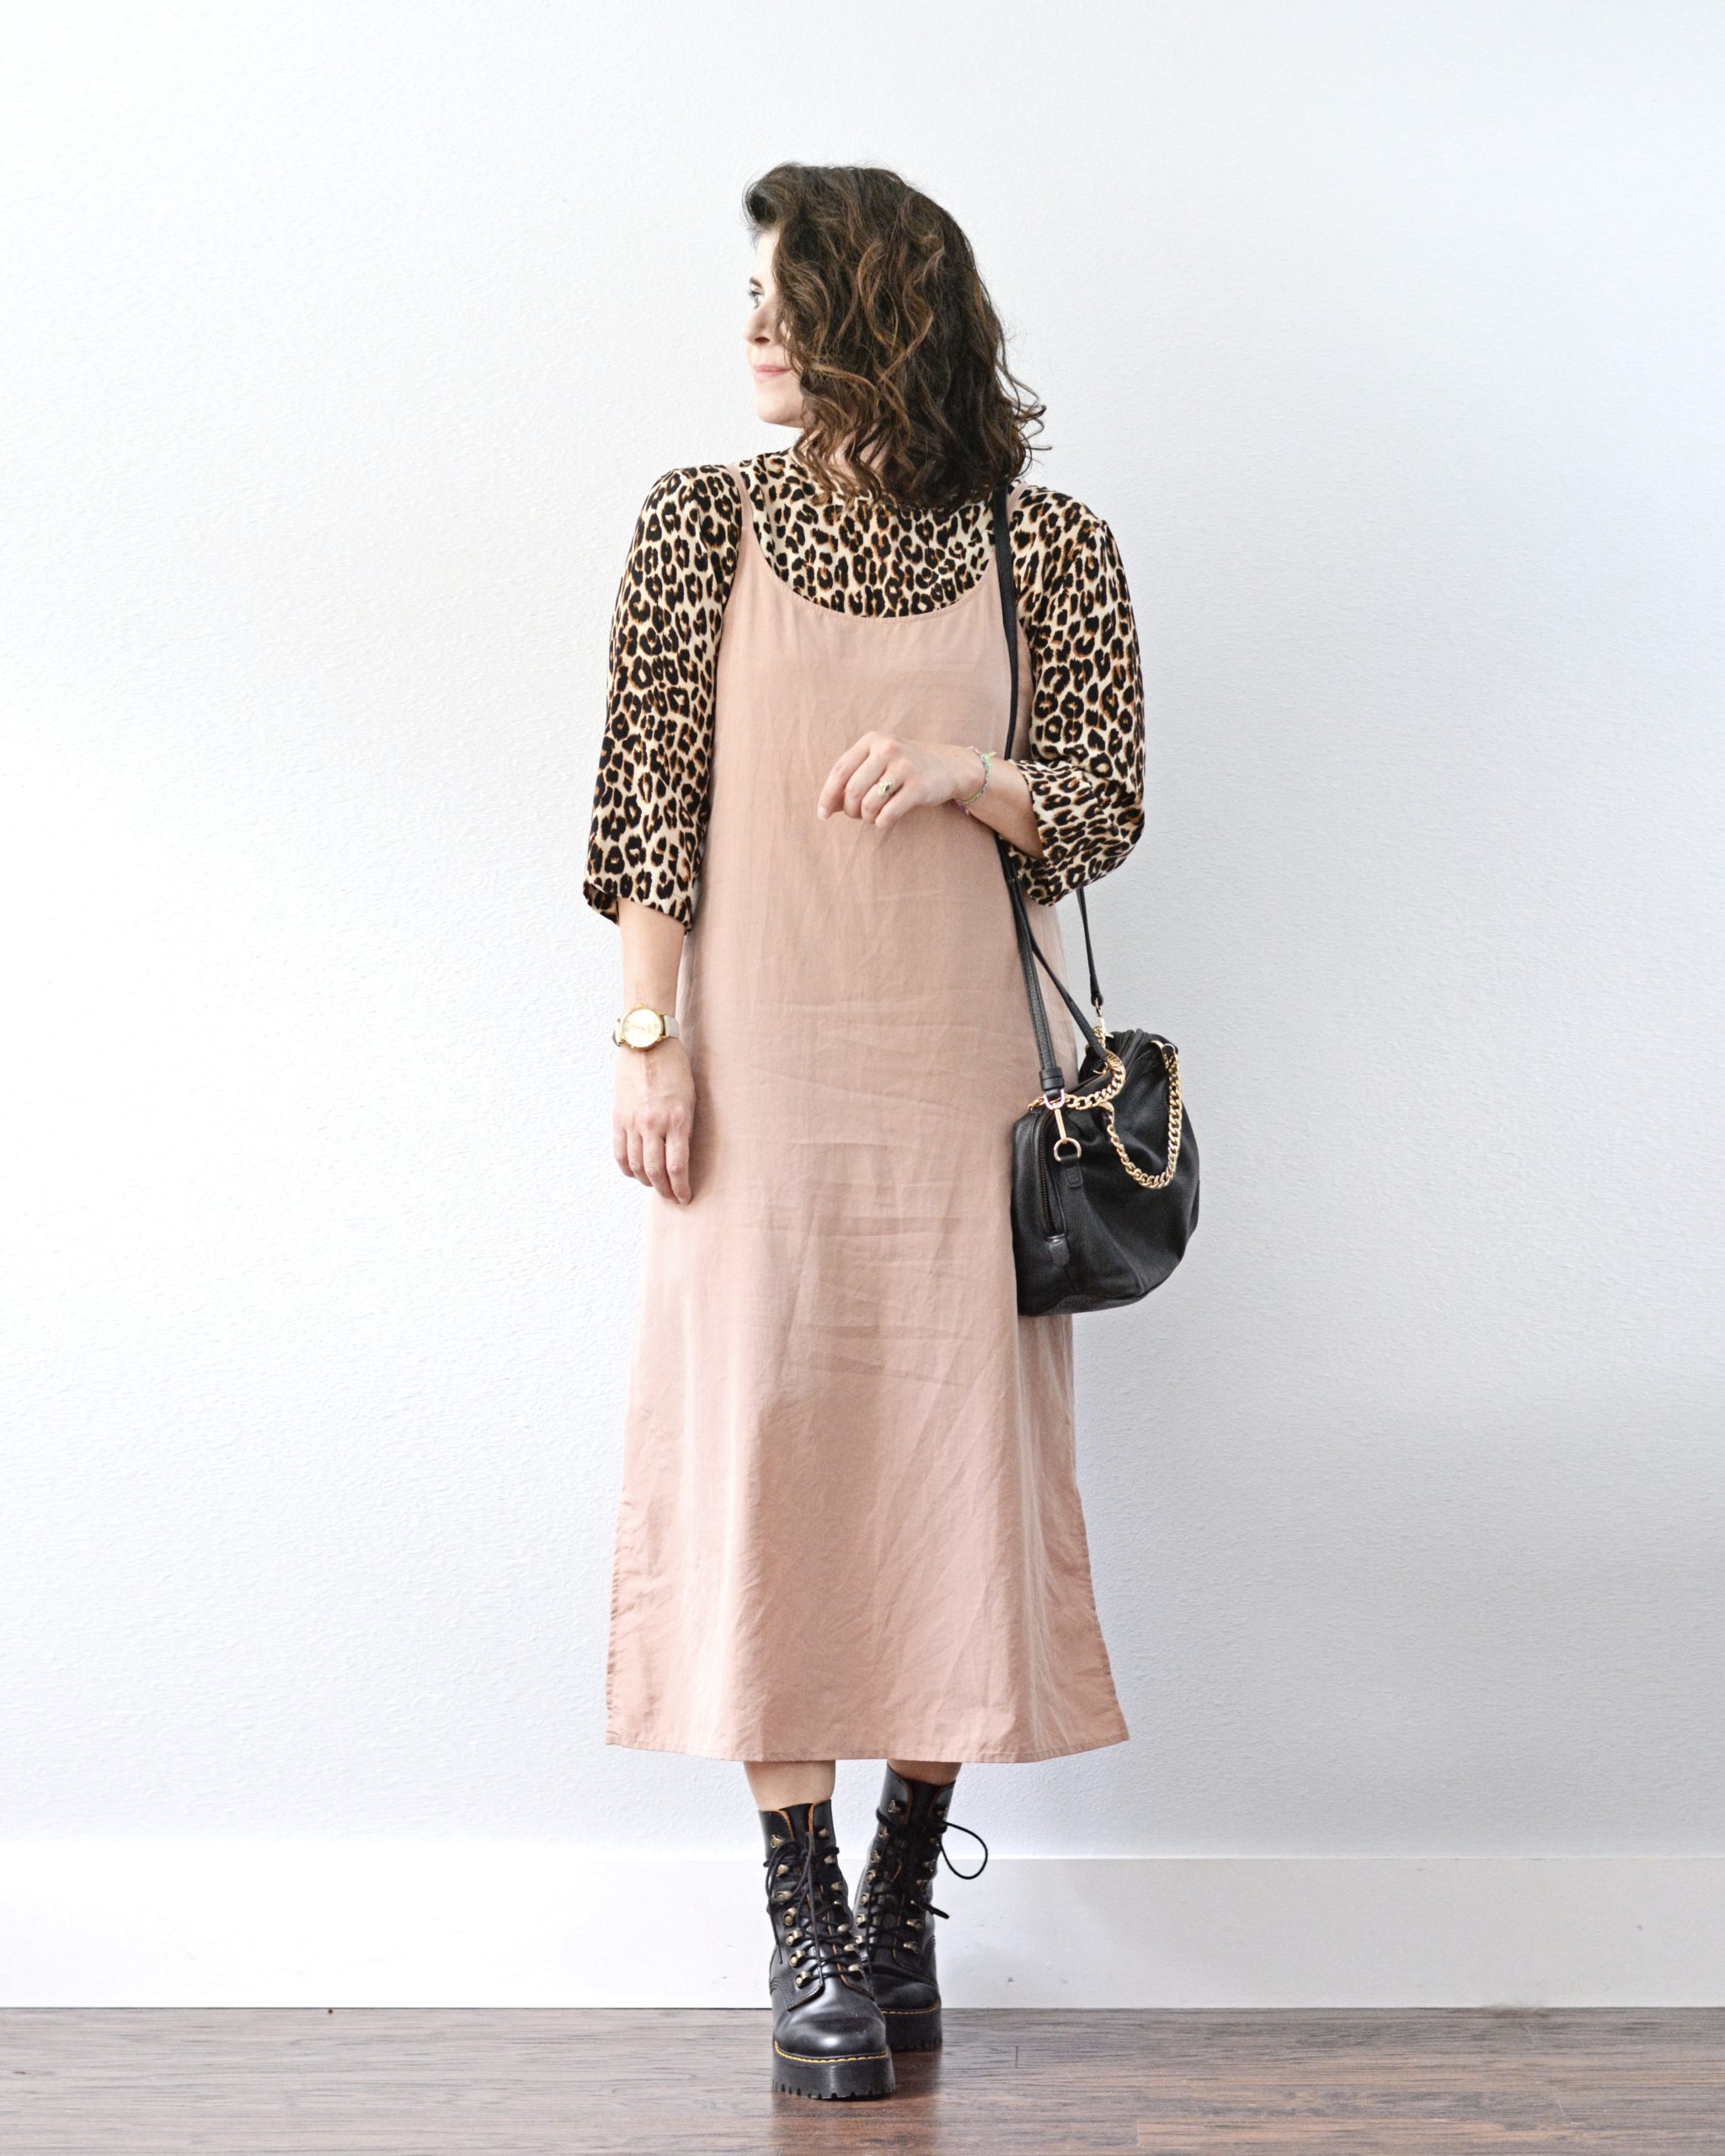 A woman standing against a light grey wall is looking to the right. She is wearing a light pink slip dress over a leopard print three quarter sleeve dress with black combat boots and a black handbag that is hanging from her left shoulder.